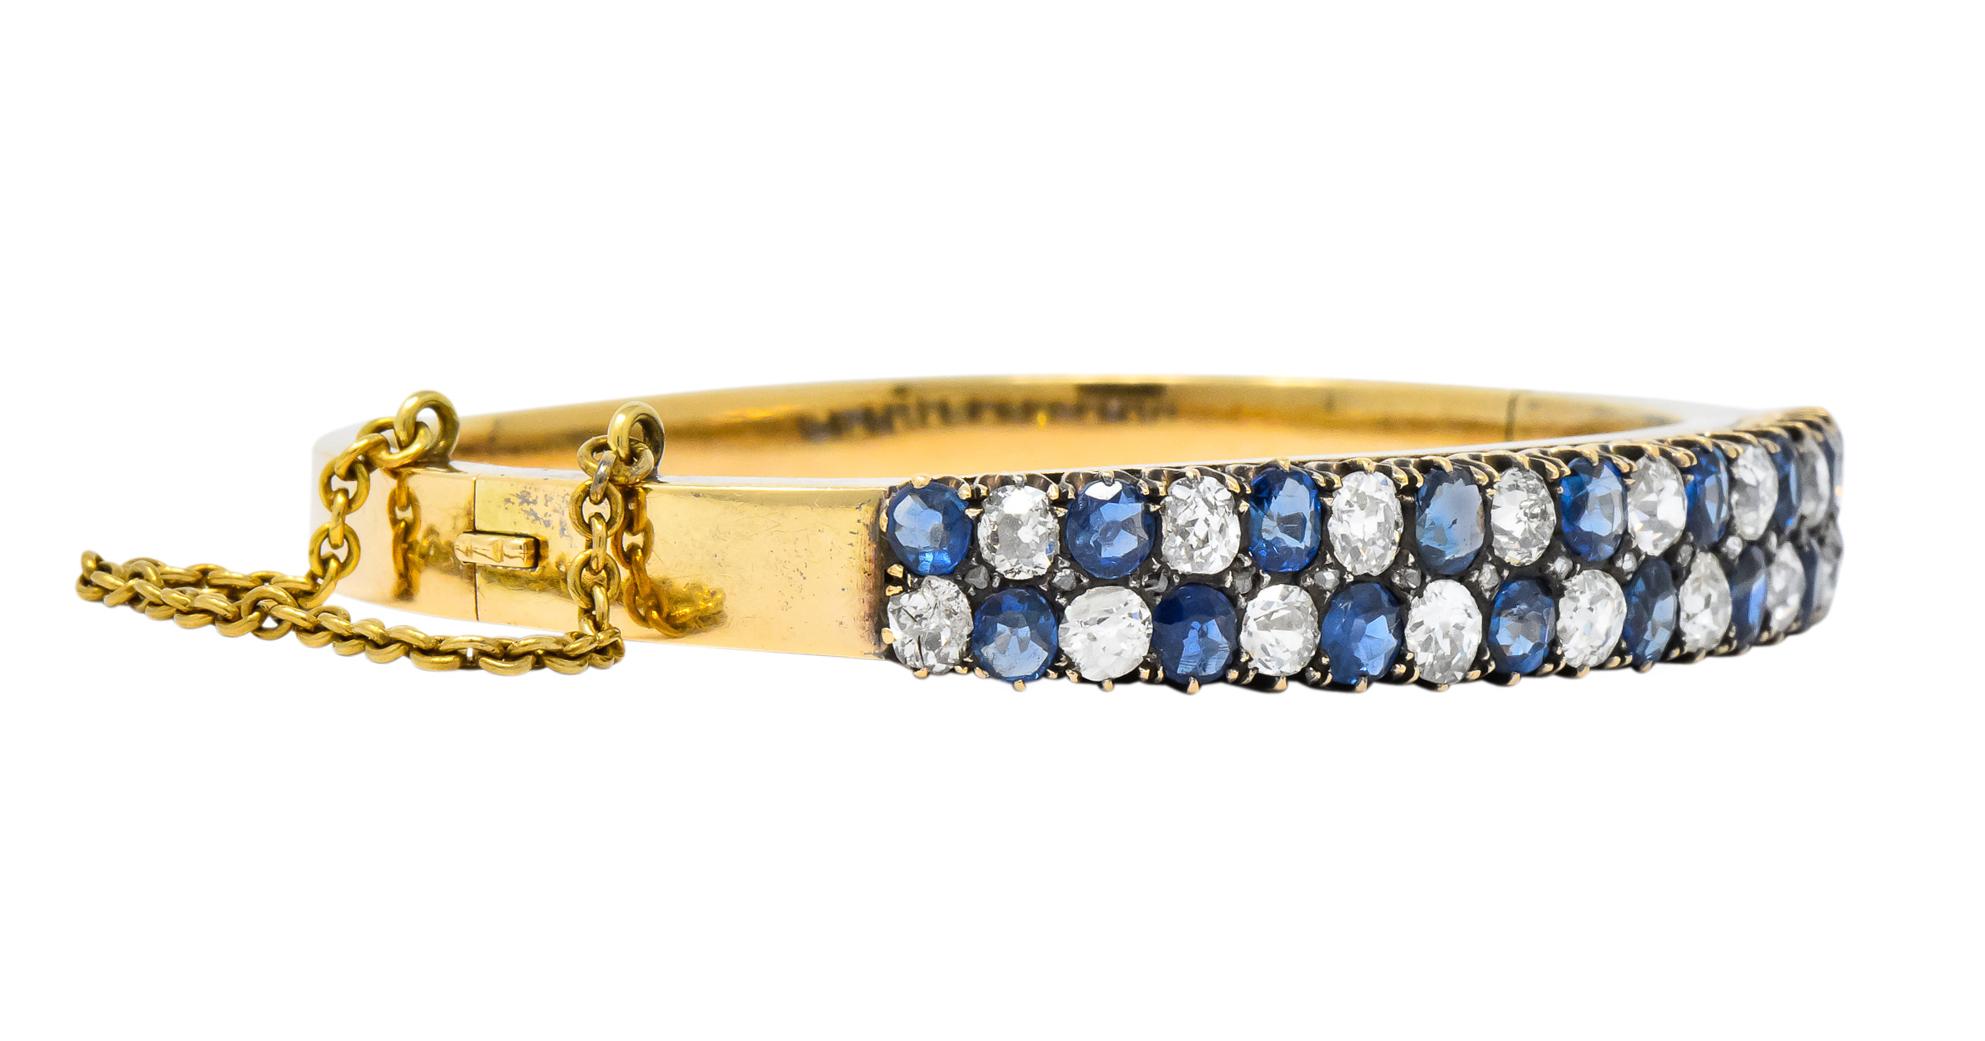 Designed as a hollow hinged bangle bracelet with chain safety and concealed clasp

Claw set to front with old mine cut diamonds and sapphires with rose cut diamond accents

Sapphires weigh approximately 3.90 carats total, transparent medium-light